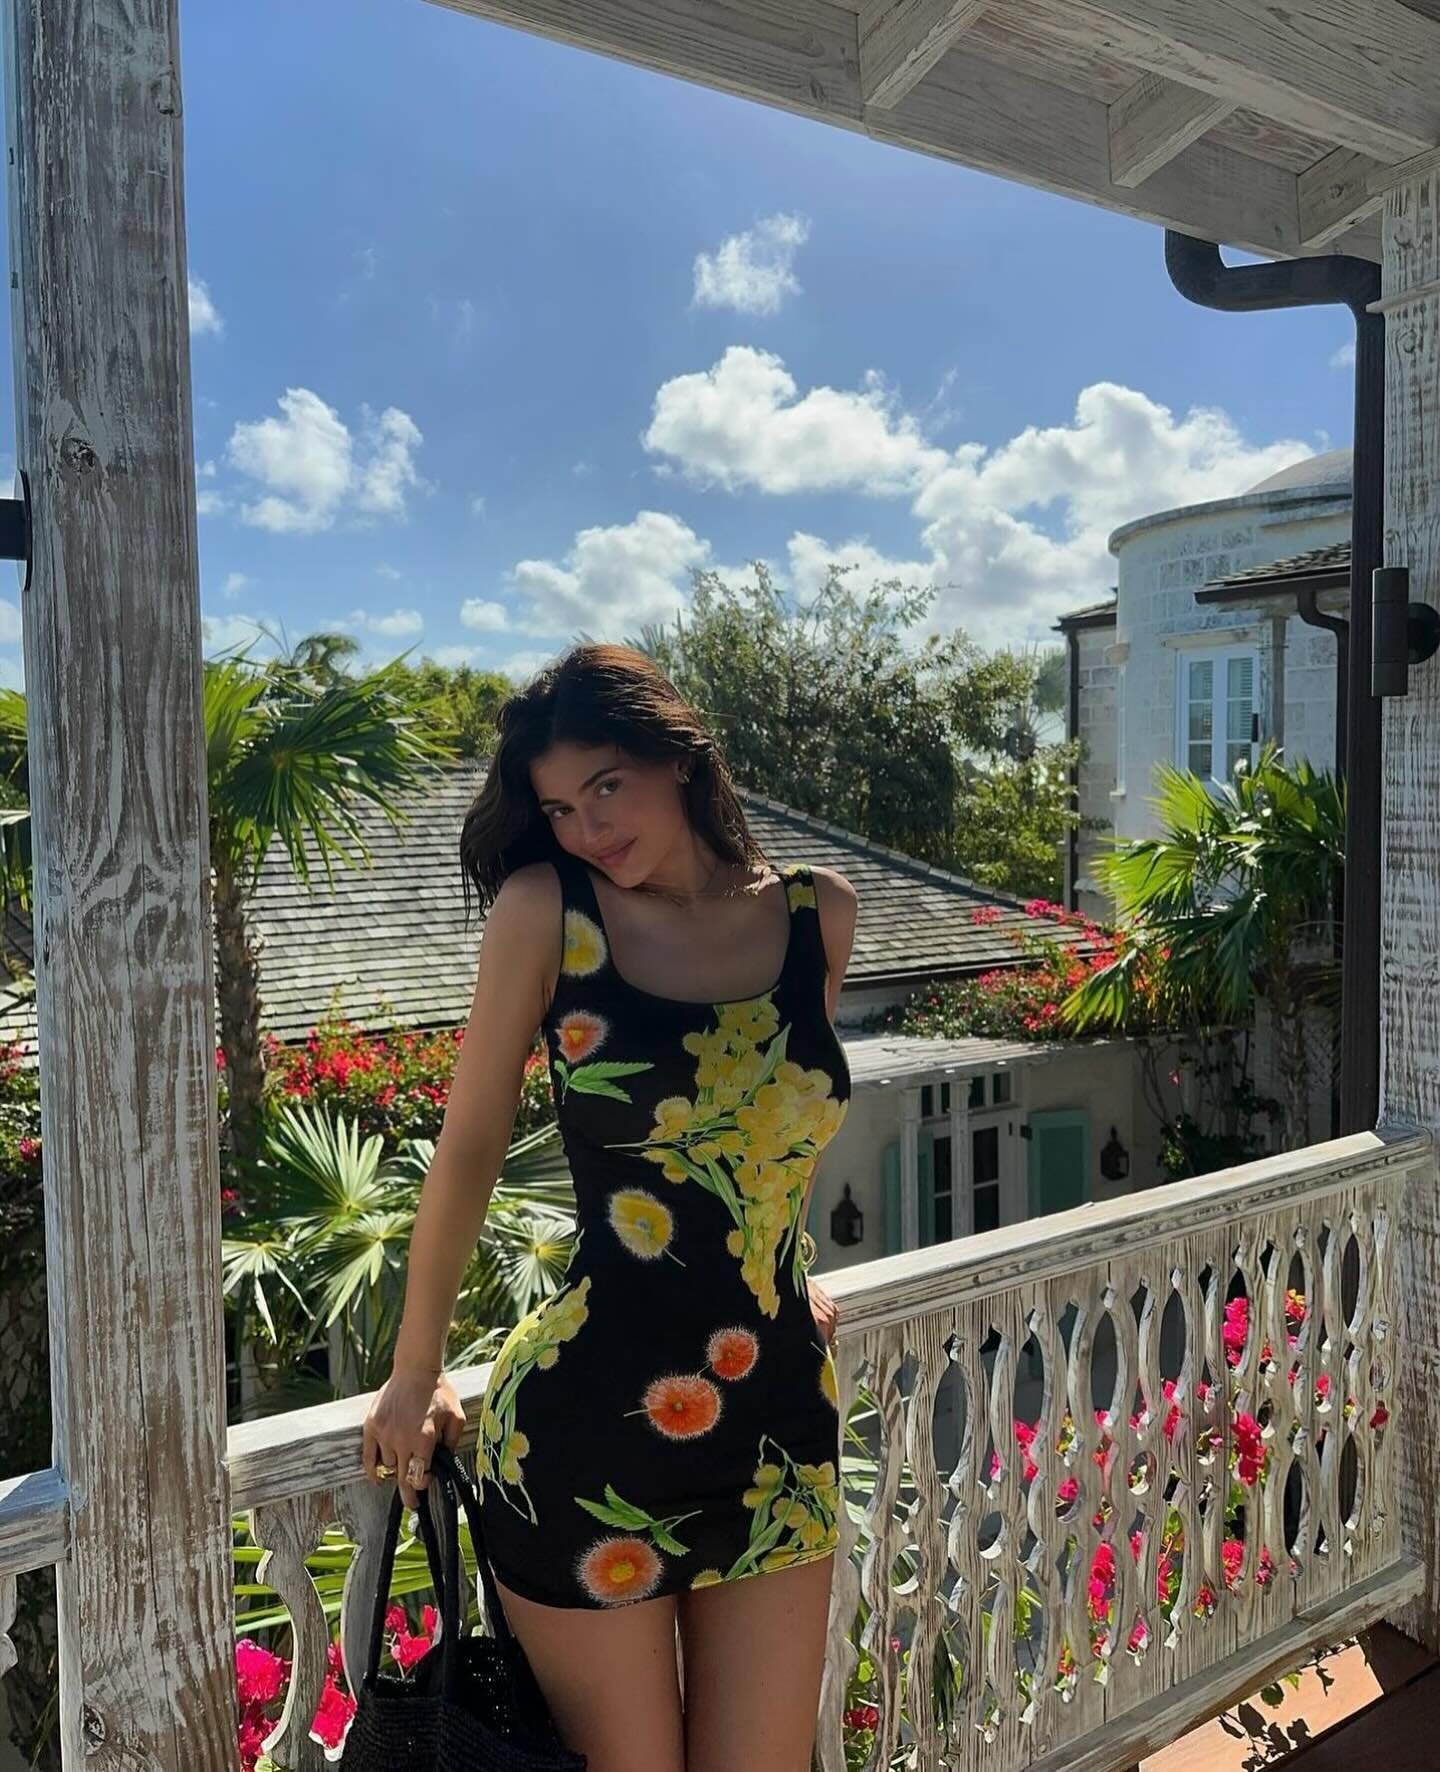 💛🖤🌼 @kyliejenner stuns while on vacation wearing a Gianni Versace dress purchased from @opulentaddict ! Styled by @makkaroo and @rosegrandquist and assisted by @ellngriggs and @roberts.charlee 
.
.
.
.
#kyliejenner #gianniversace #versace #kardash